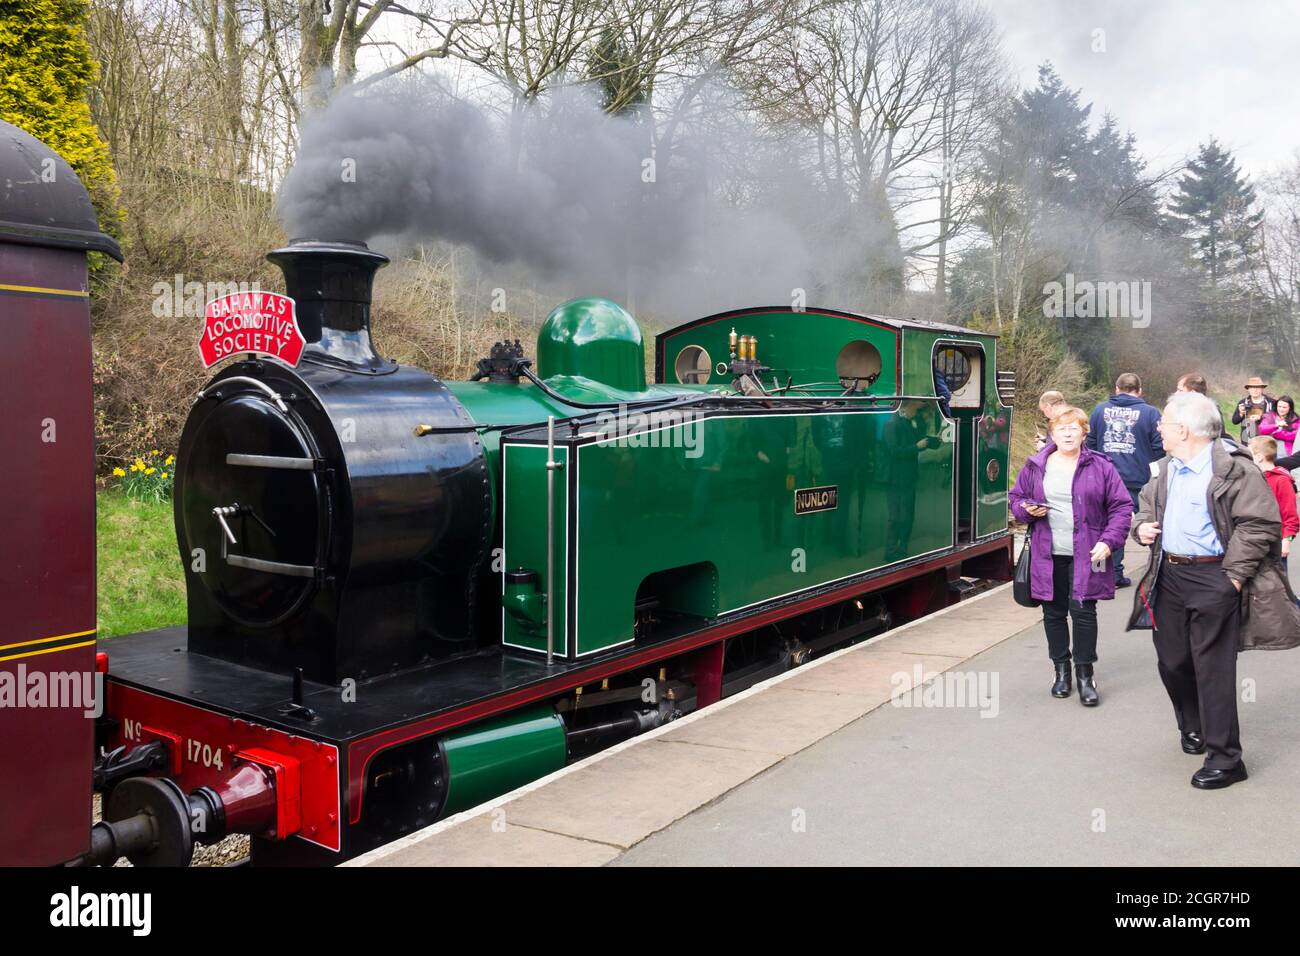 1704, Nunlow, an ex-industrial 0-6-0 side tank engine built by Hudswell Clarke & Co. Ltd of Leeds, running for a last weekend before major overhaul. Stock Photo